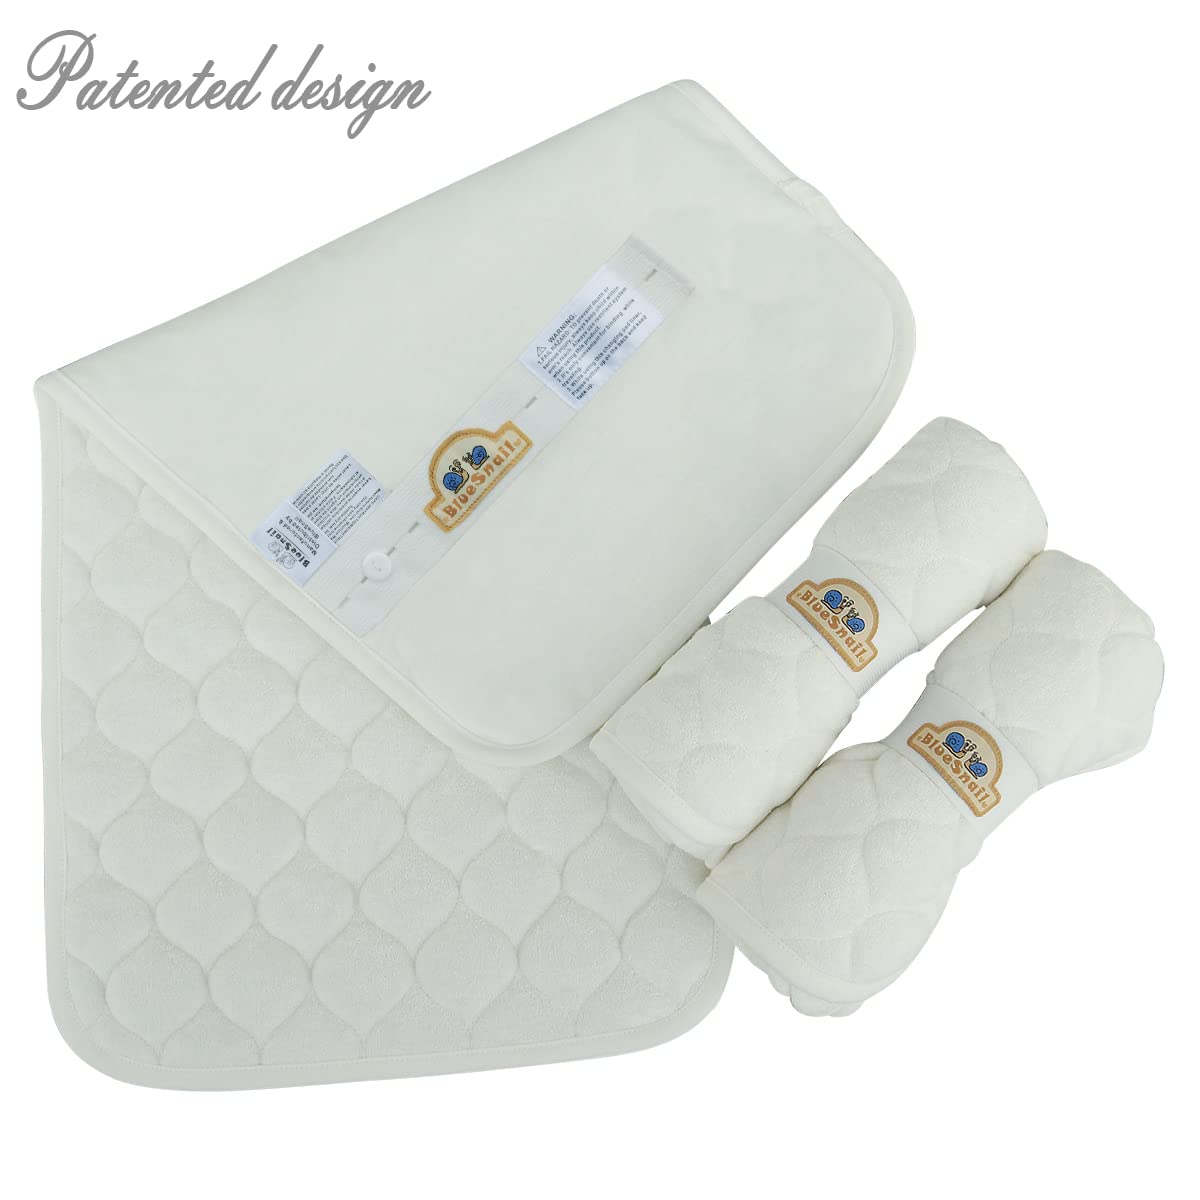 BlueSnail Bamboo Quilted Thicker Waterproof Changing Pad Liners, 3 Count (Snow White)